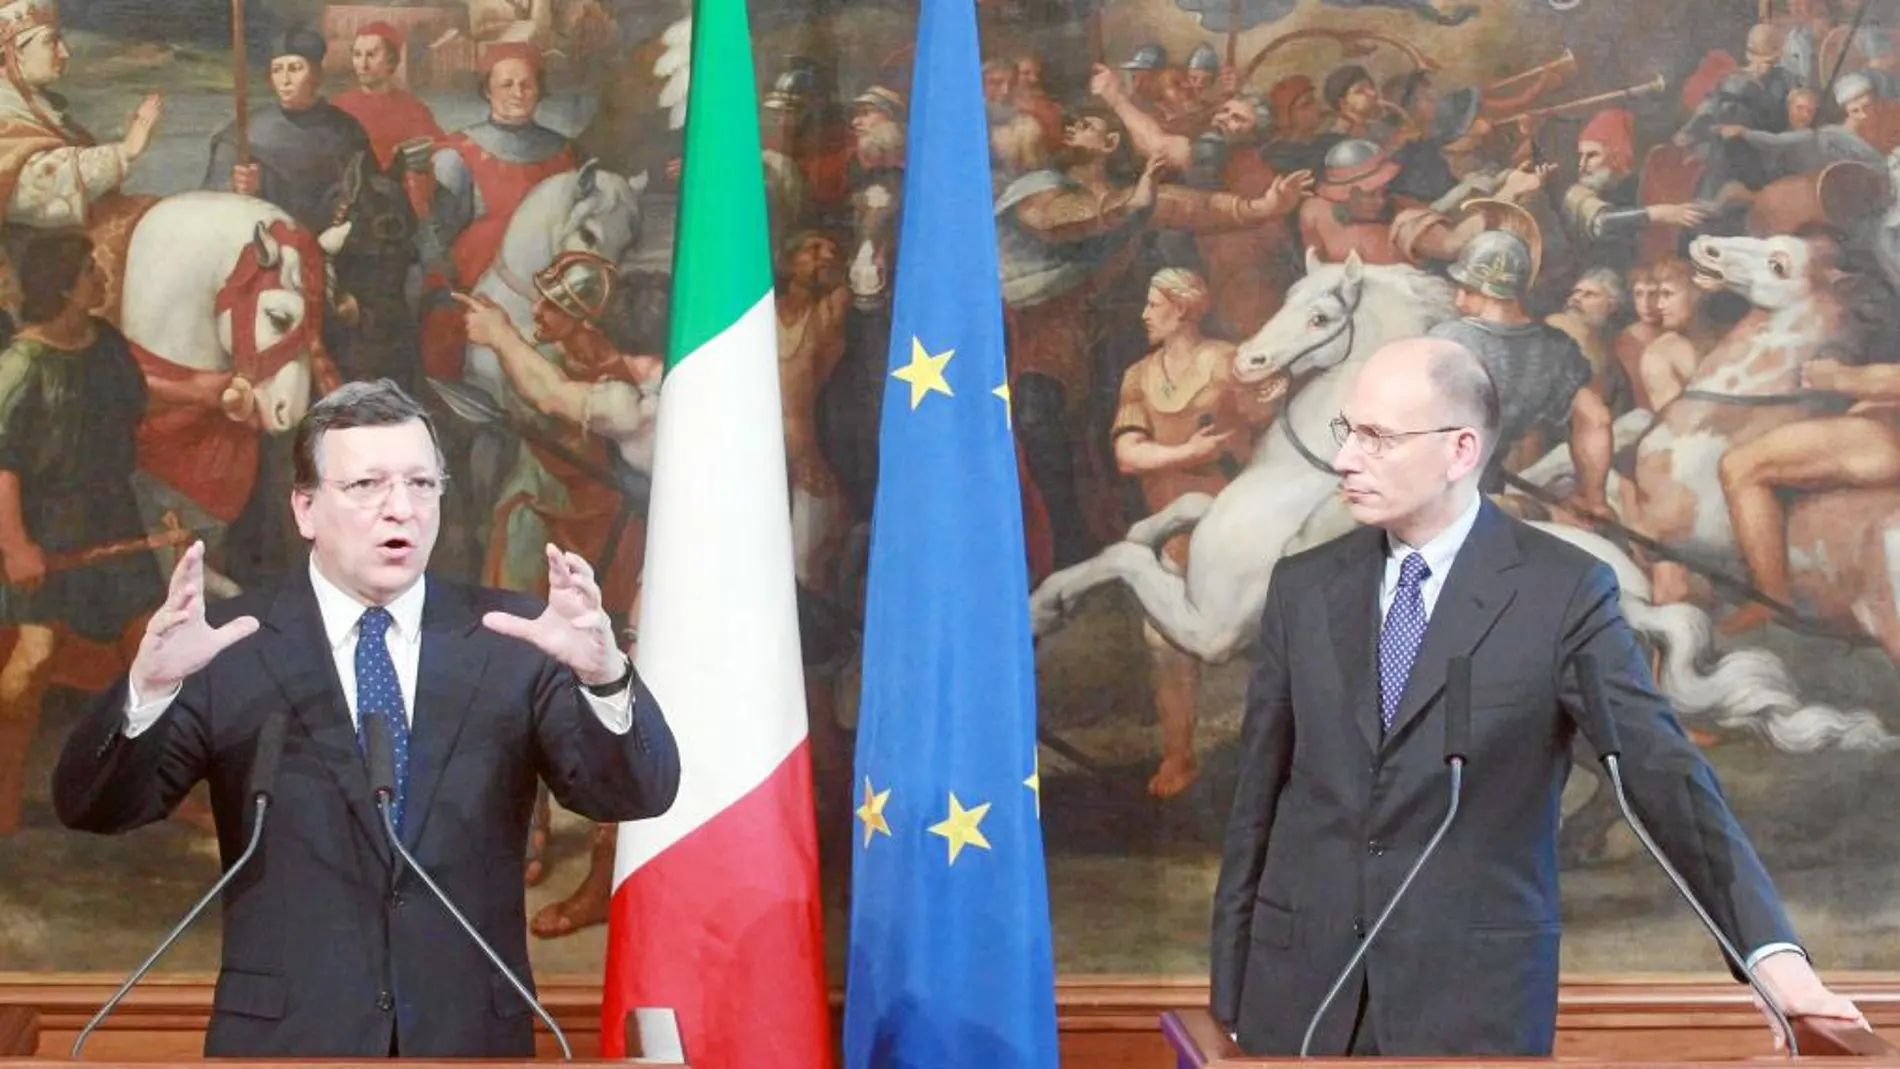 . Rome (Italy), 15/06/2013.- EU President Jose Manuel Durao Barroso (L), standing next to Italian Prime Minister Enrico Letta (R), gestures as he speaks during the press conference at Chigi Palace in Rome, Italy, 15 June 2013. EFE/EPA/FABIO CAMPANA